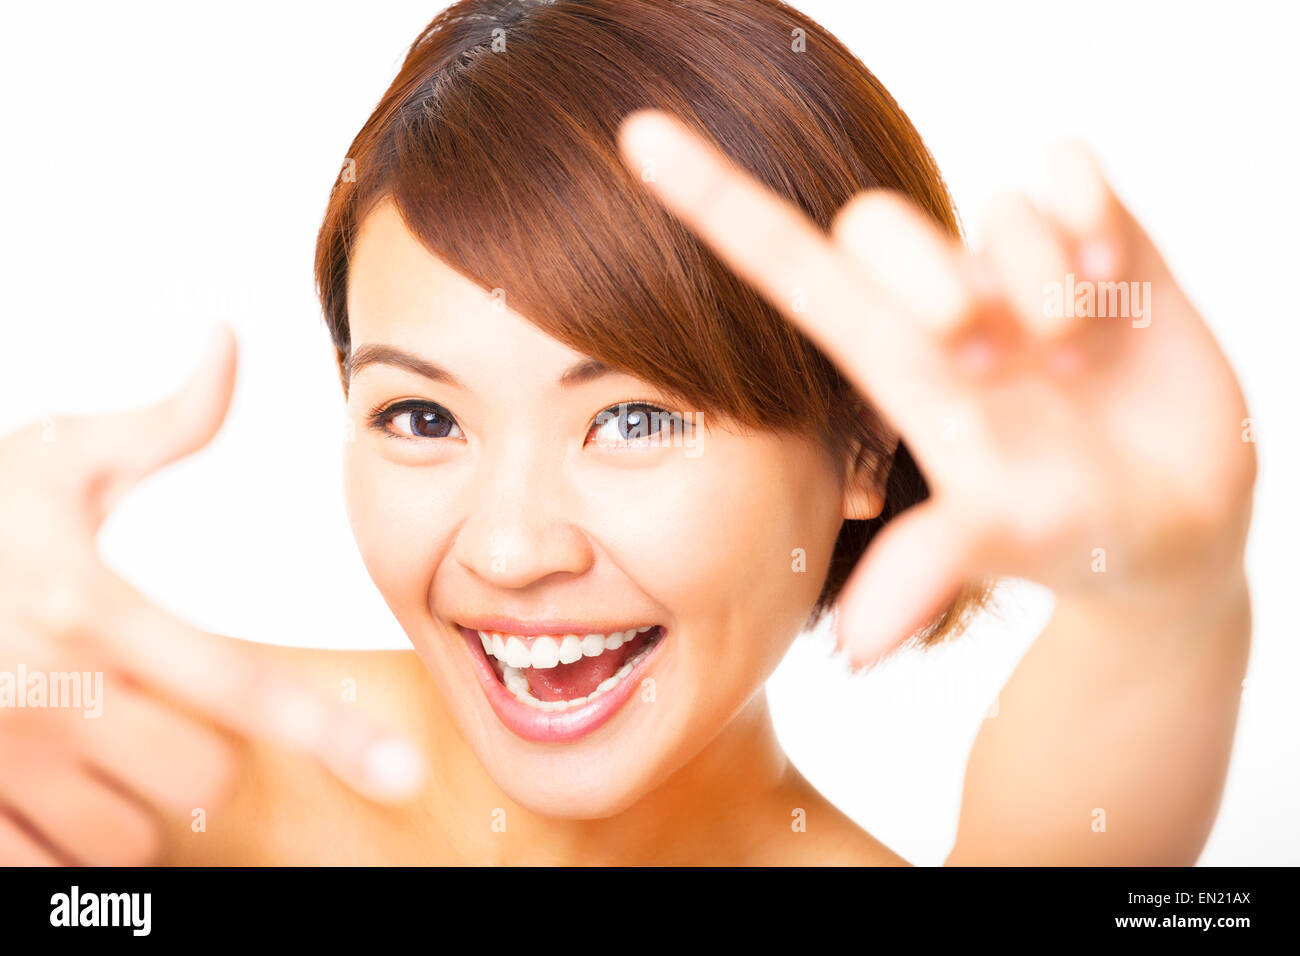 happy young Woman showing frame finger sign Stock Photo